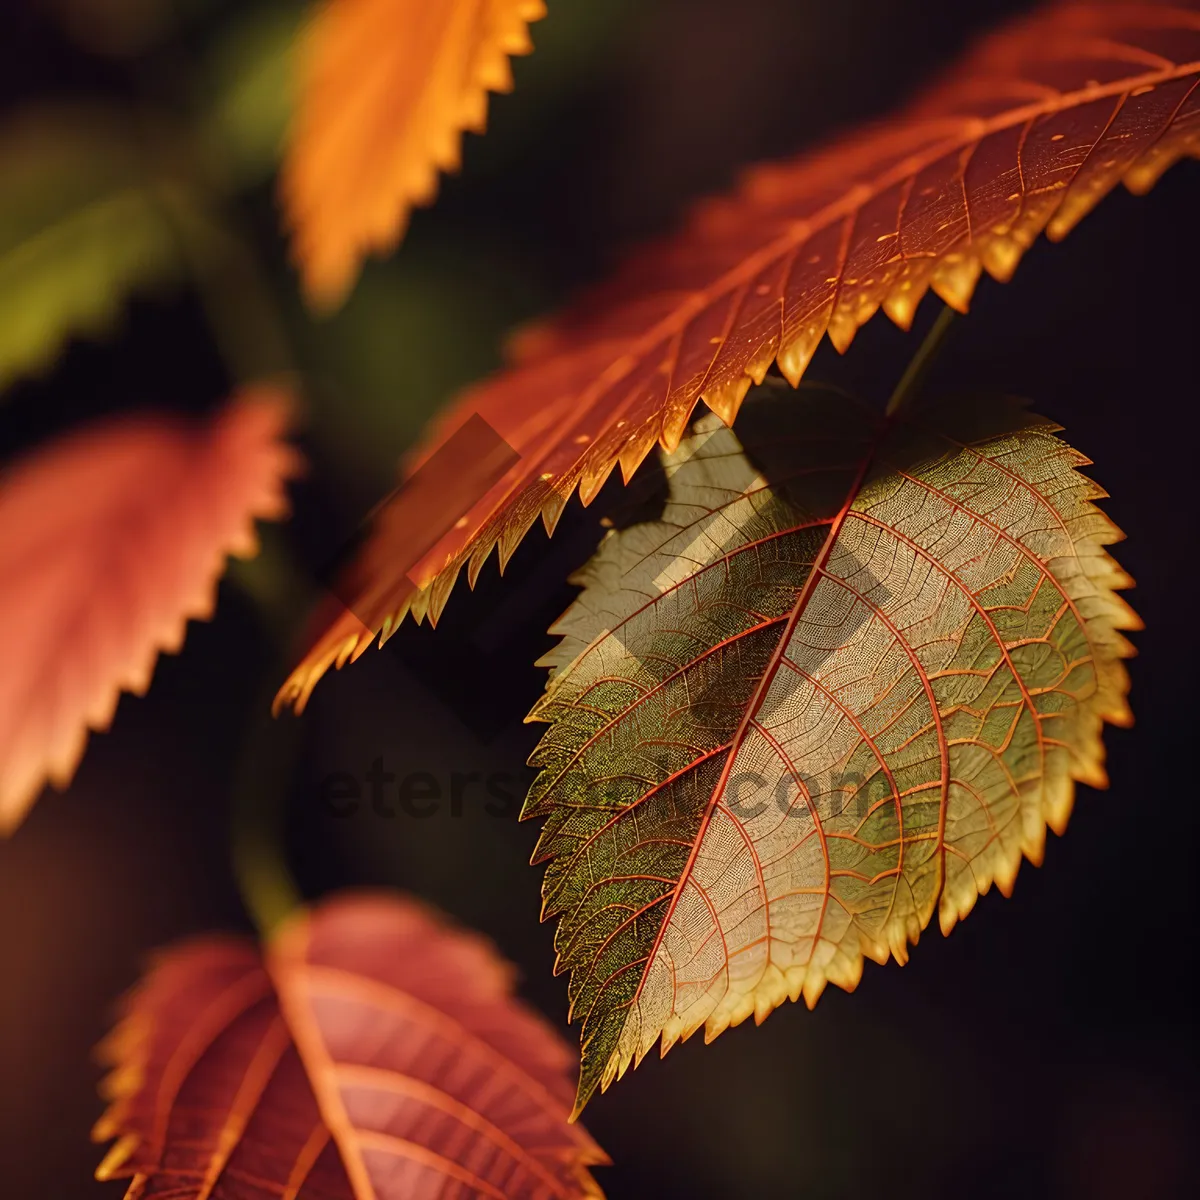 Picture of Golden Fall Foliage: Vibrant Maple Leaves in Autumn